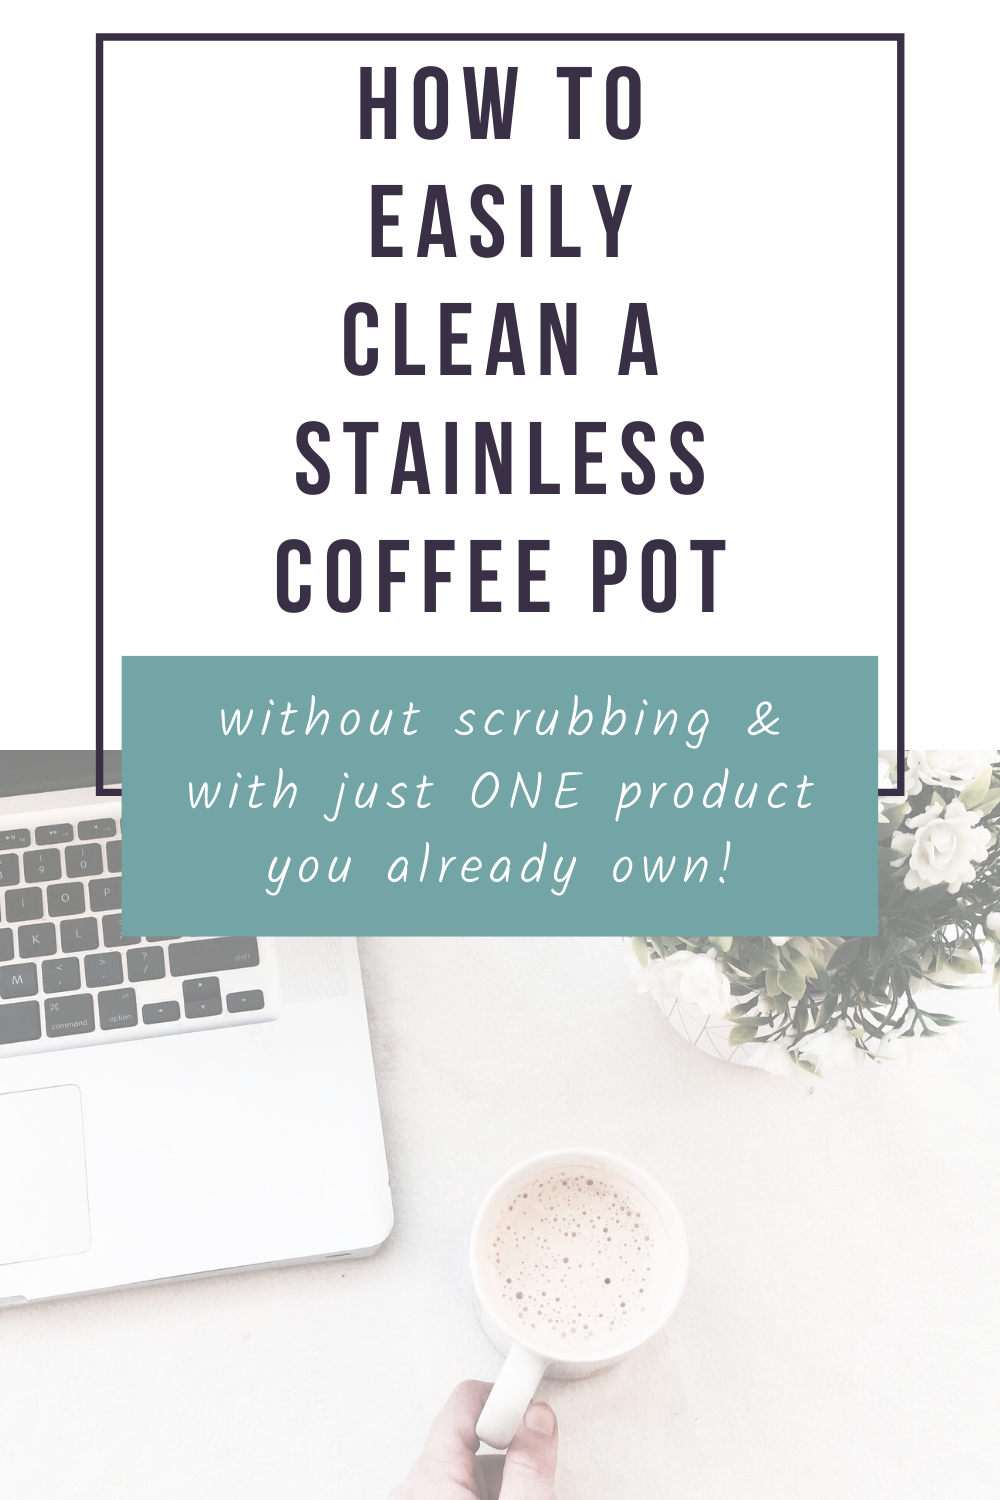 https://simplyorganized.me/wp-content/uploads/2012/08/how-to-clean-a-stainless-coffee-pot.png